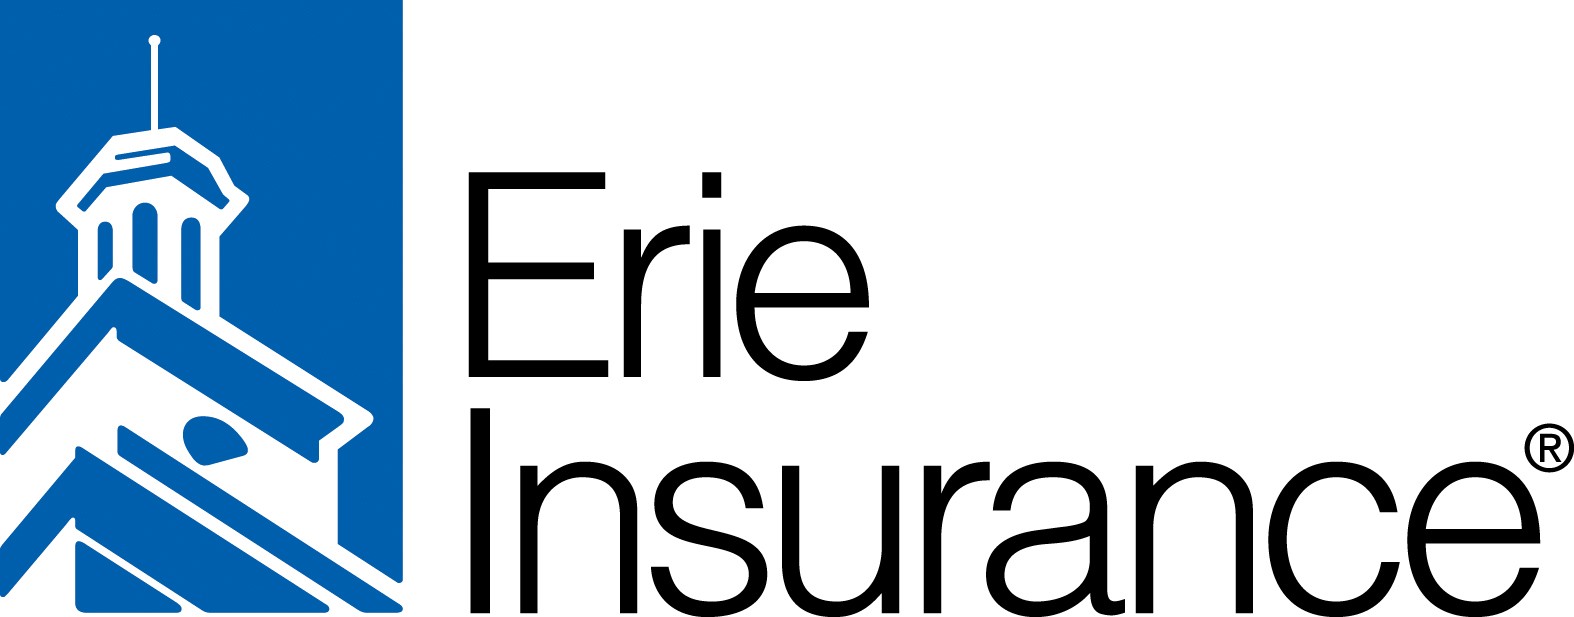 Maryland Insurance Agencies Accuse Erie Insurance of Discriminatory  Practices